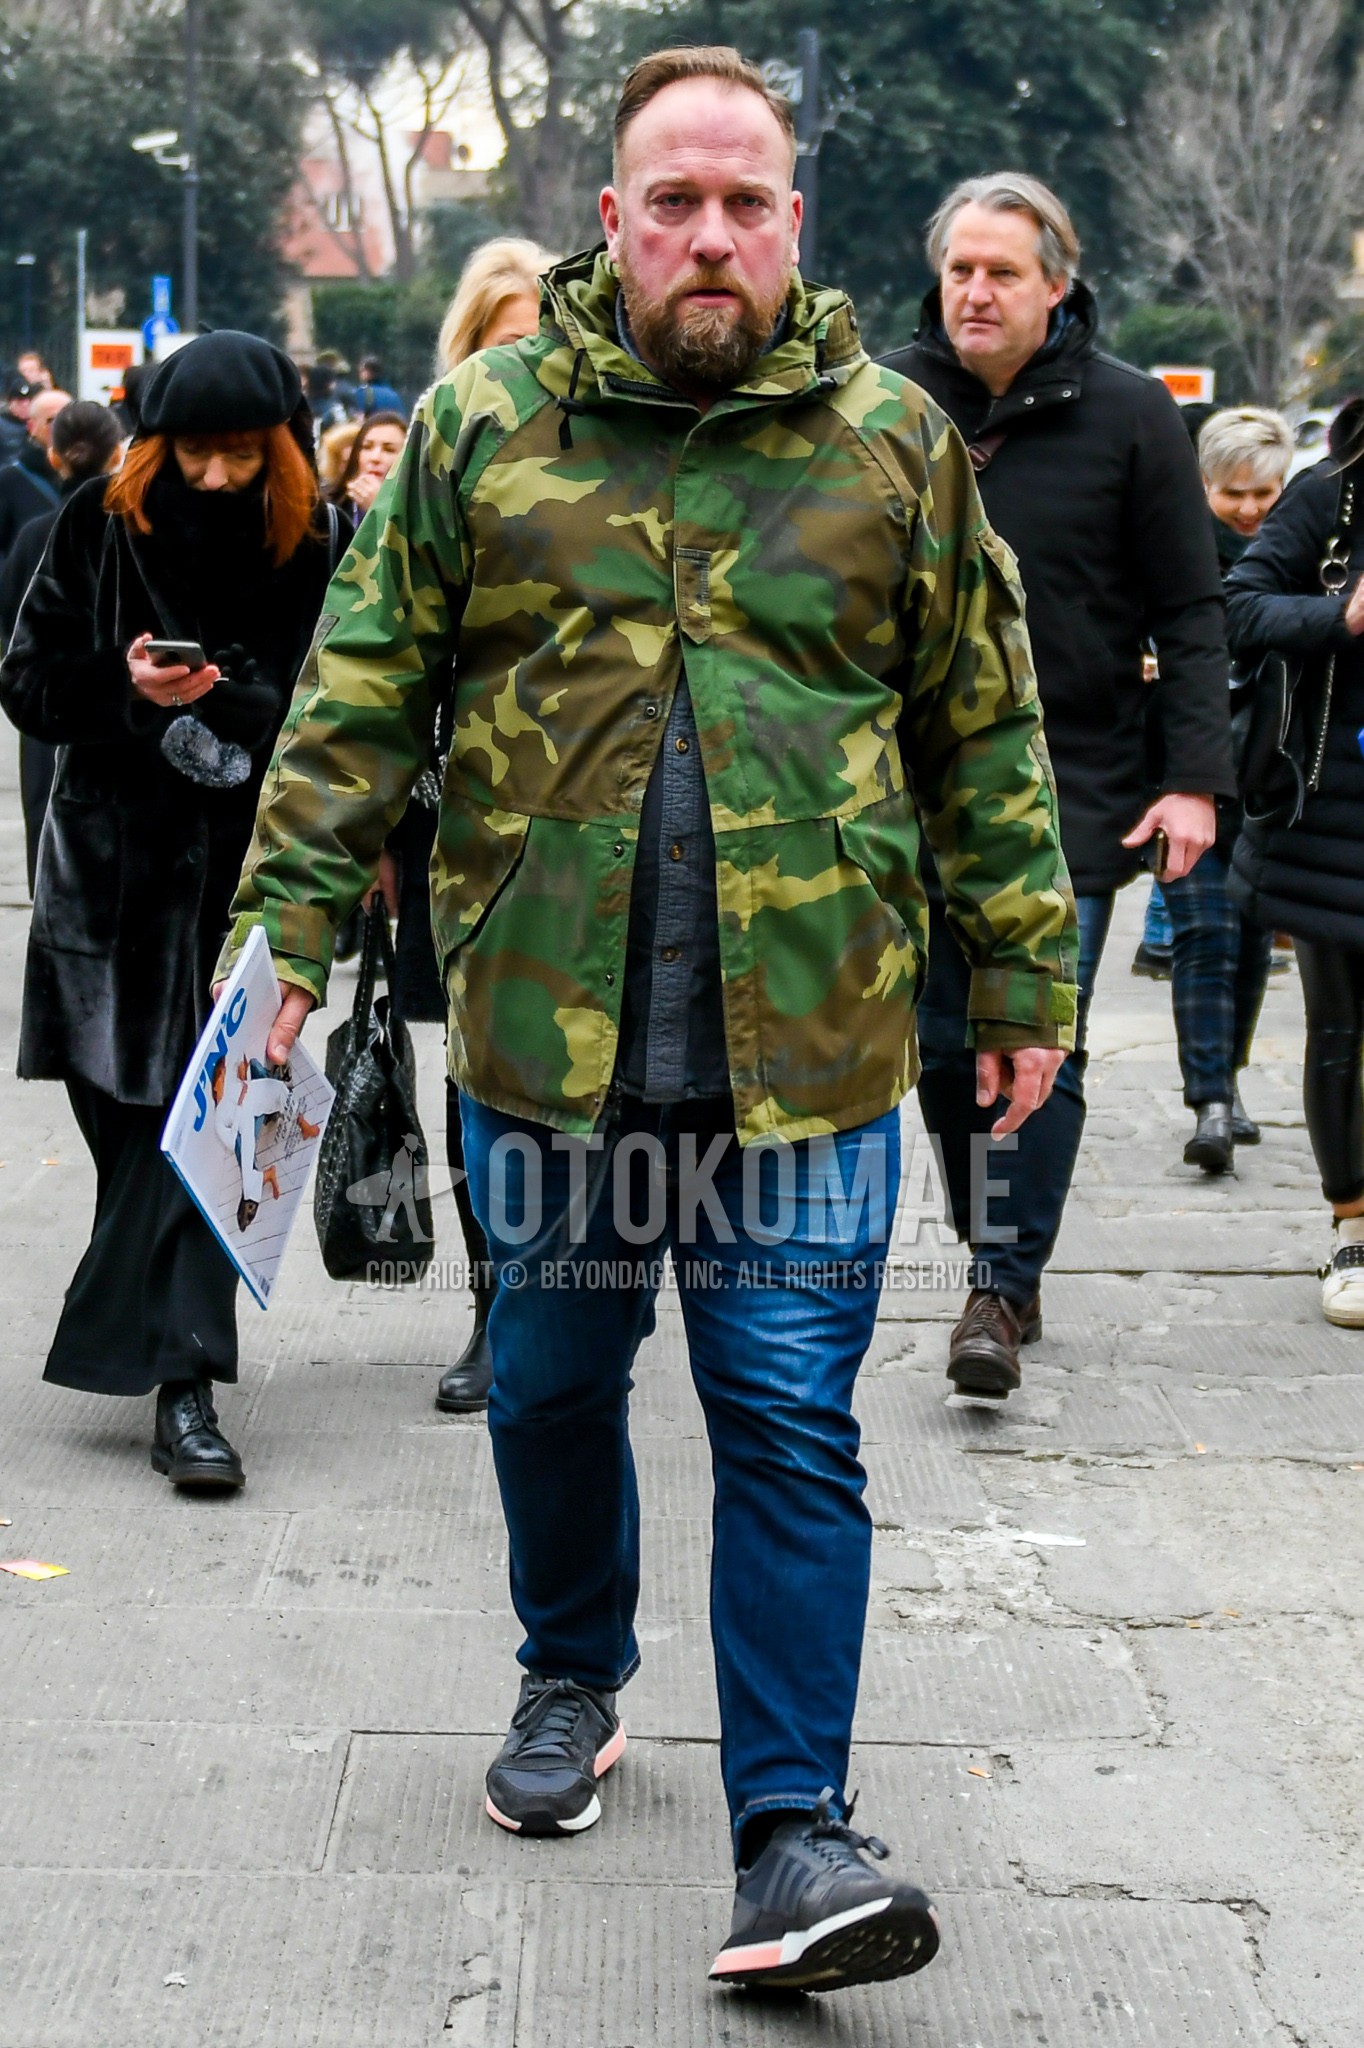 Men's autumn winter outfit with olive green camouflage hooded coat, gray plain shirt, blue plain denim/jeans, black low-cut sneakers.